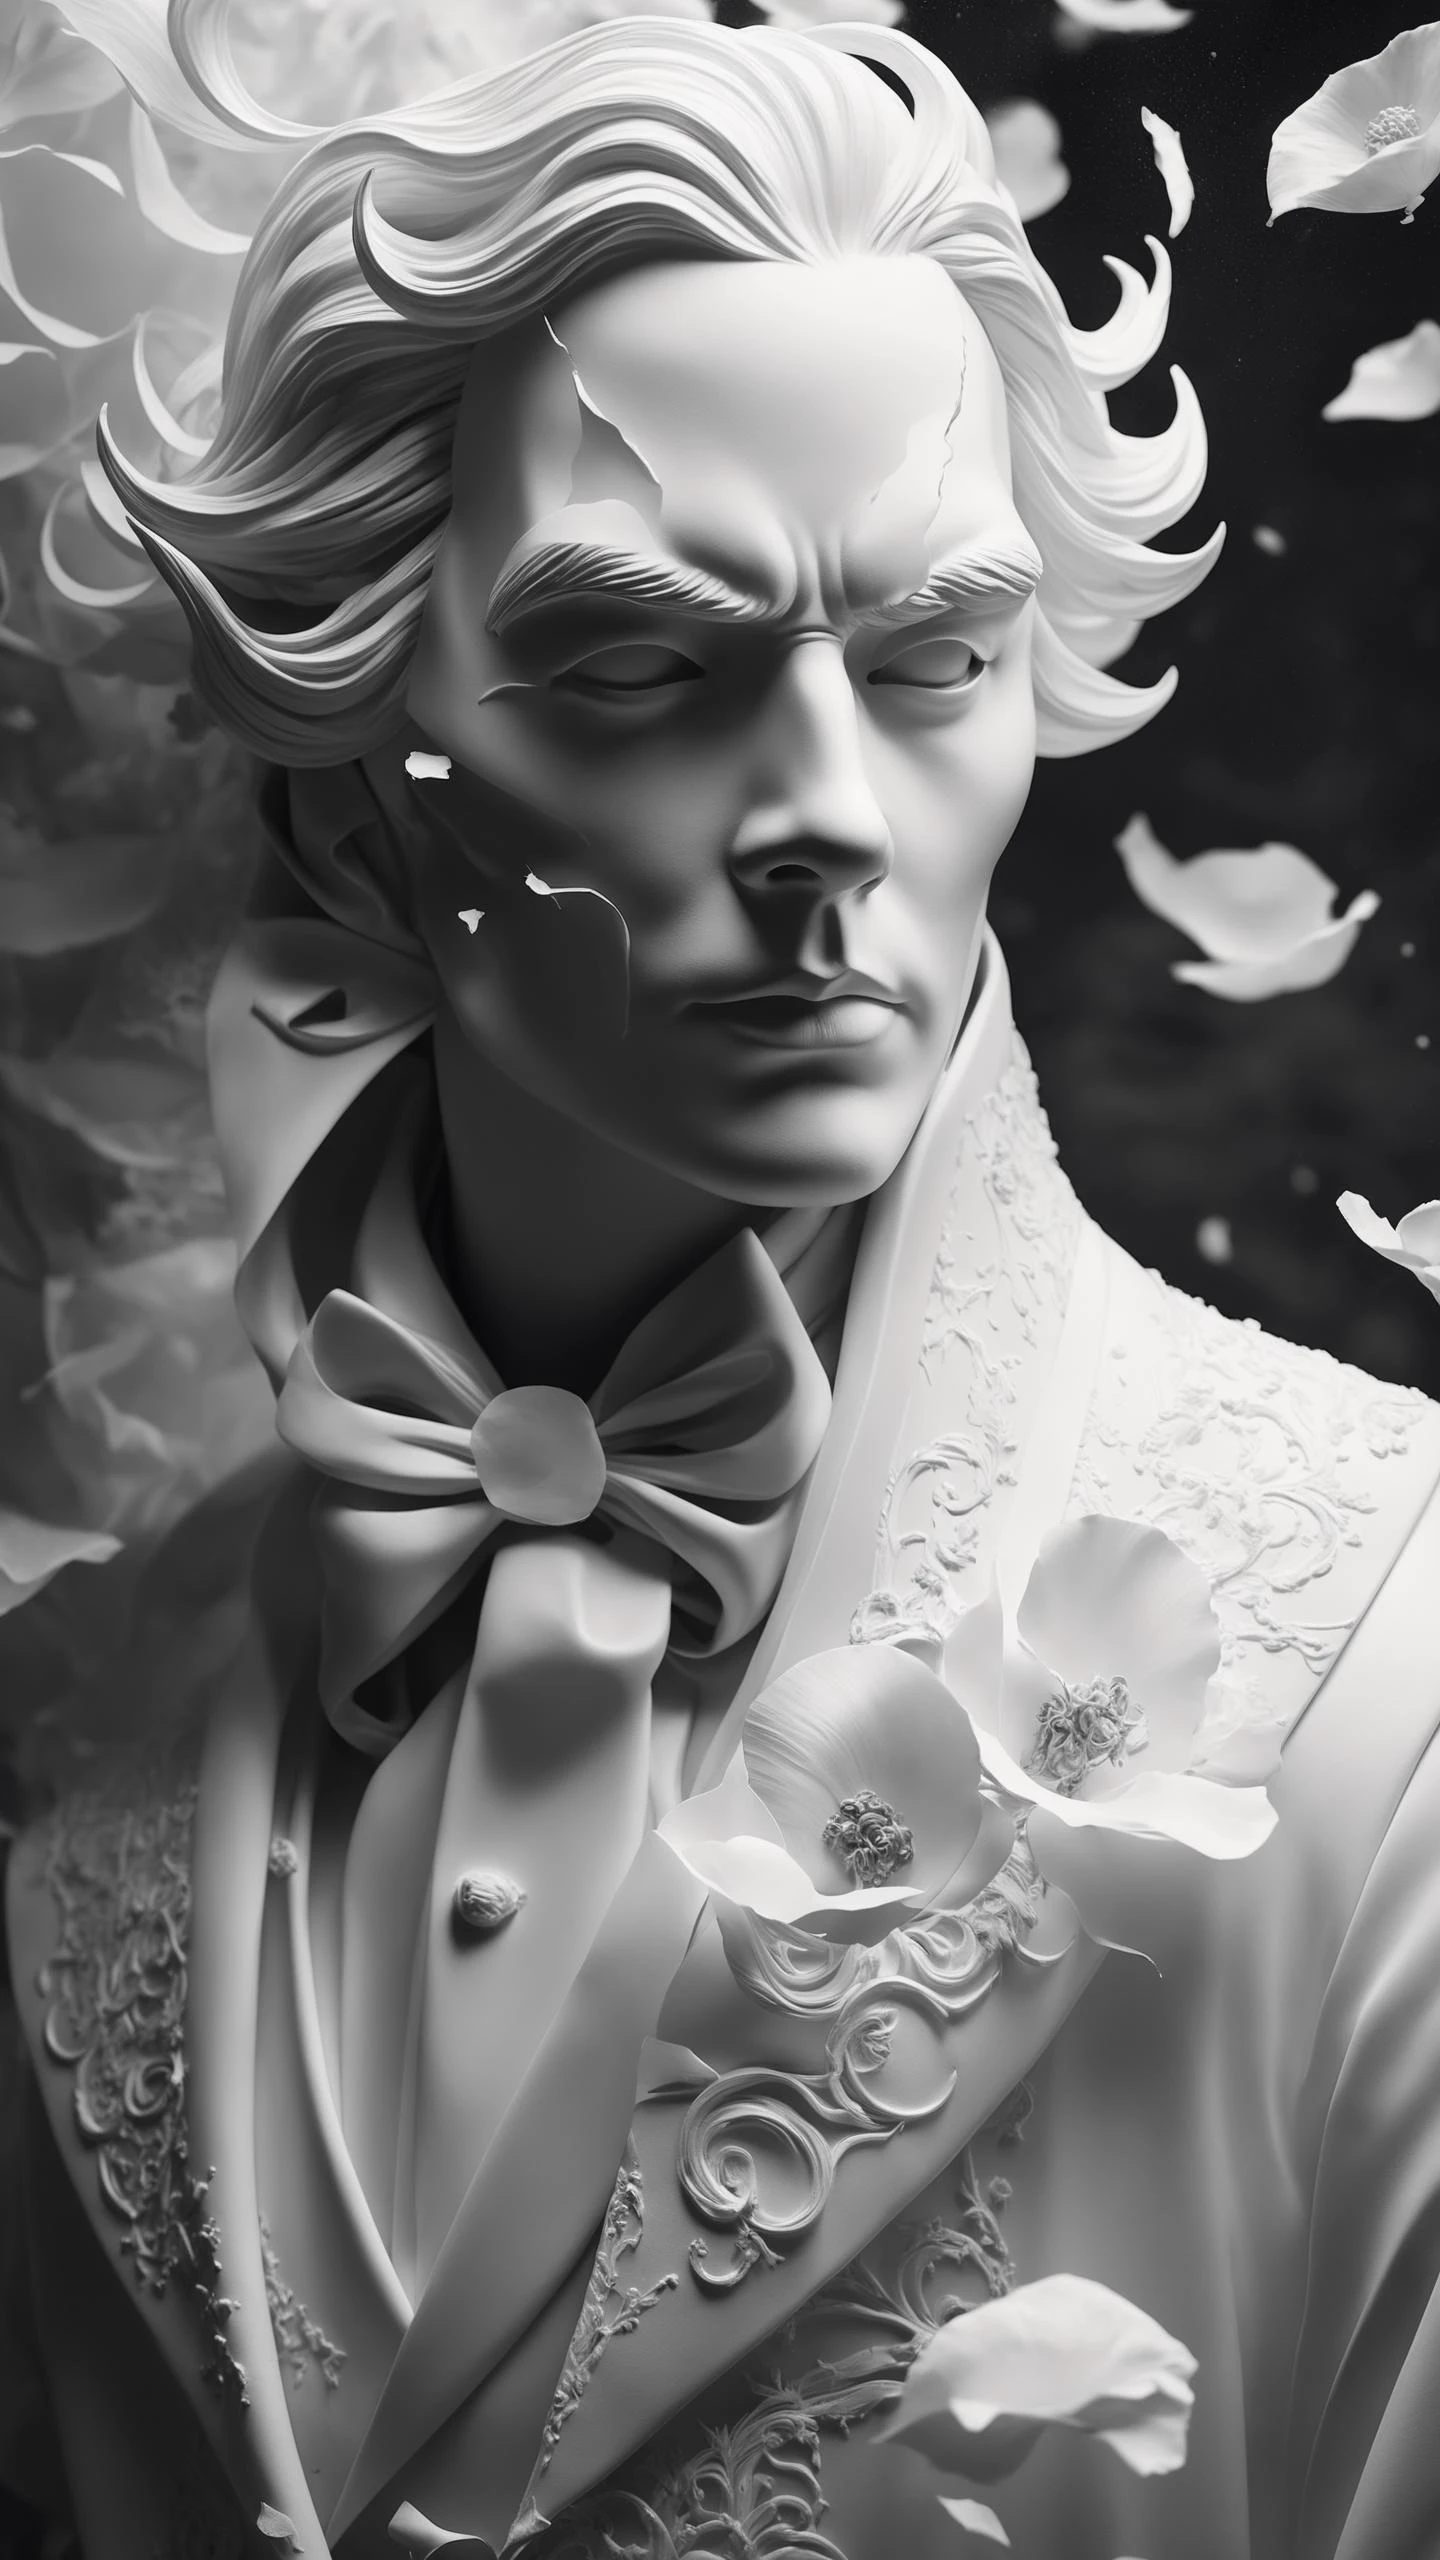 Ebenezer Scrooge, ghost of the past, ghost of the present and ghost of the future, In a surreal monochrome world, a mysterious figure in a porcelain mask stands among a swirling storm of broken mirrors and floating petals, plaster threads, papier-mch, Mika Asai macro photography, close-up, hyper detailed, artstation trend, sharp focus, studio photography, intricate detail, high detail, artstation trends, sharp focus, studio photography, intricate details, high detail, inspiration, authors: Jim Mahfood, Henry Asensio, Greg Rutkowski, Craig Davison, Jenny Saville, Bernie Wrightson, Frank Frazetta